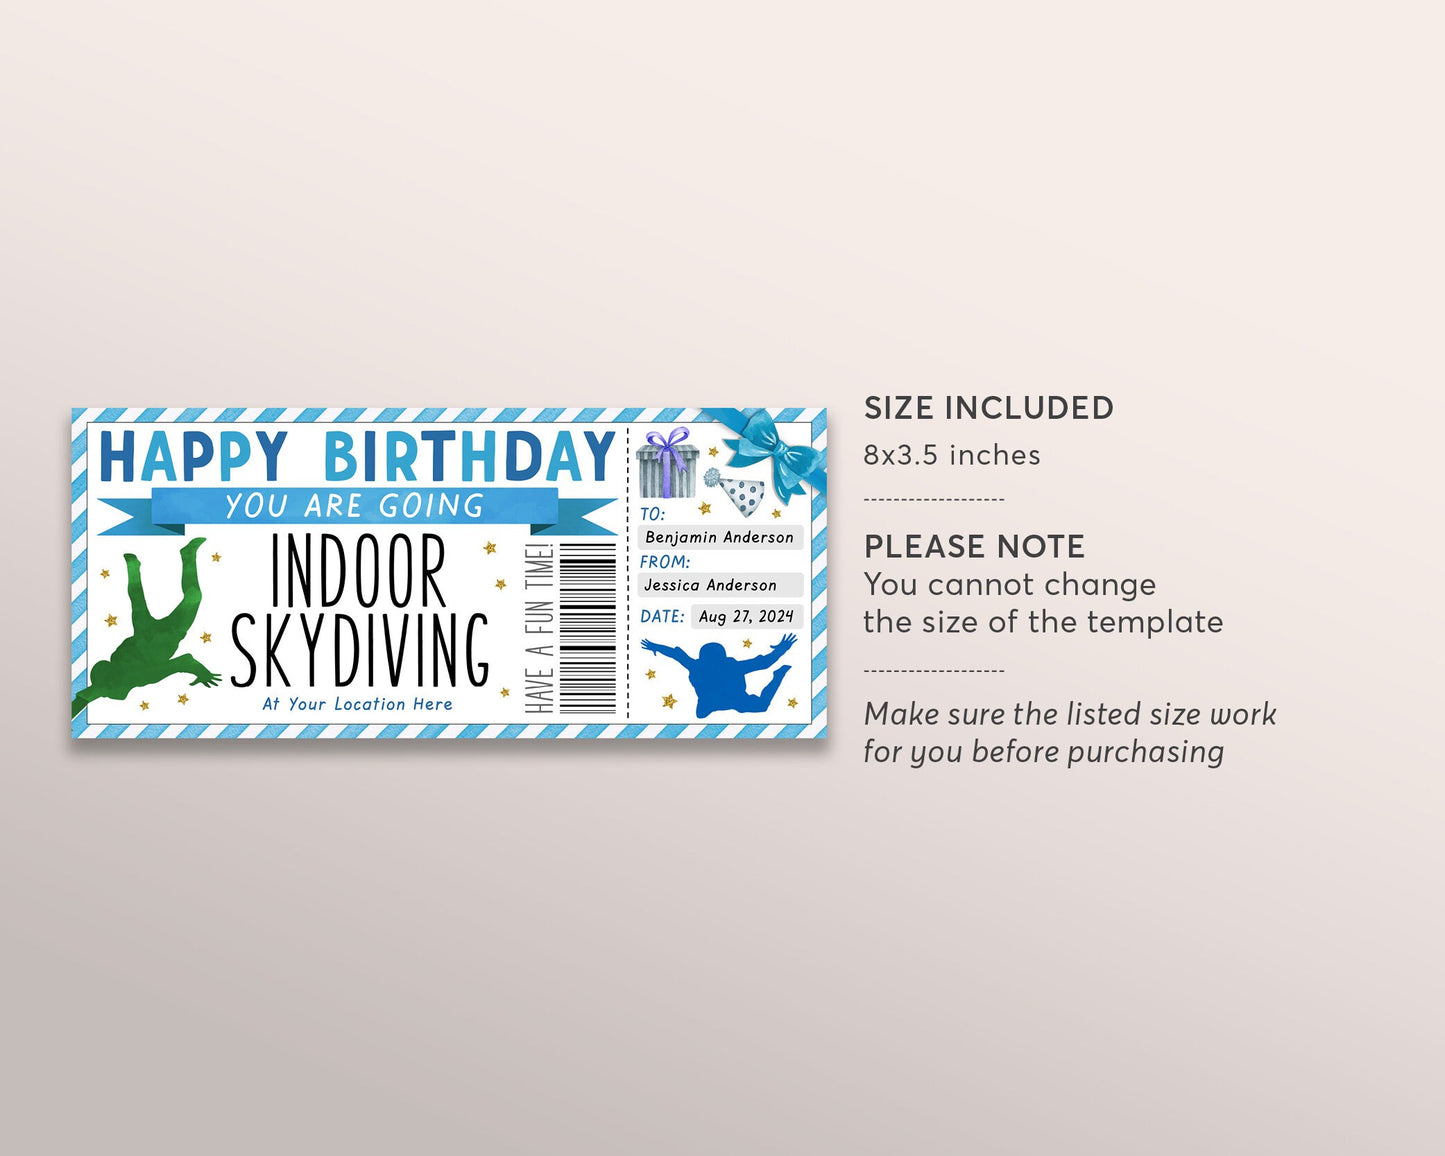 Indoor Skydiving Gift Certificate Ticket Editable Template, Birthday Surprise Sky Dive Experience Gift Voucher Coupon For Adults Teens Kids